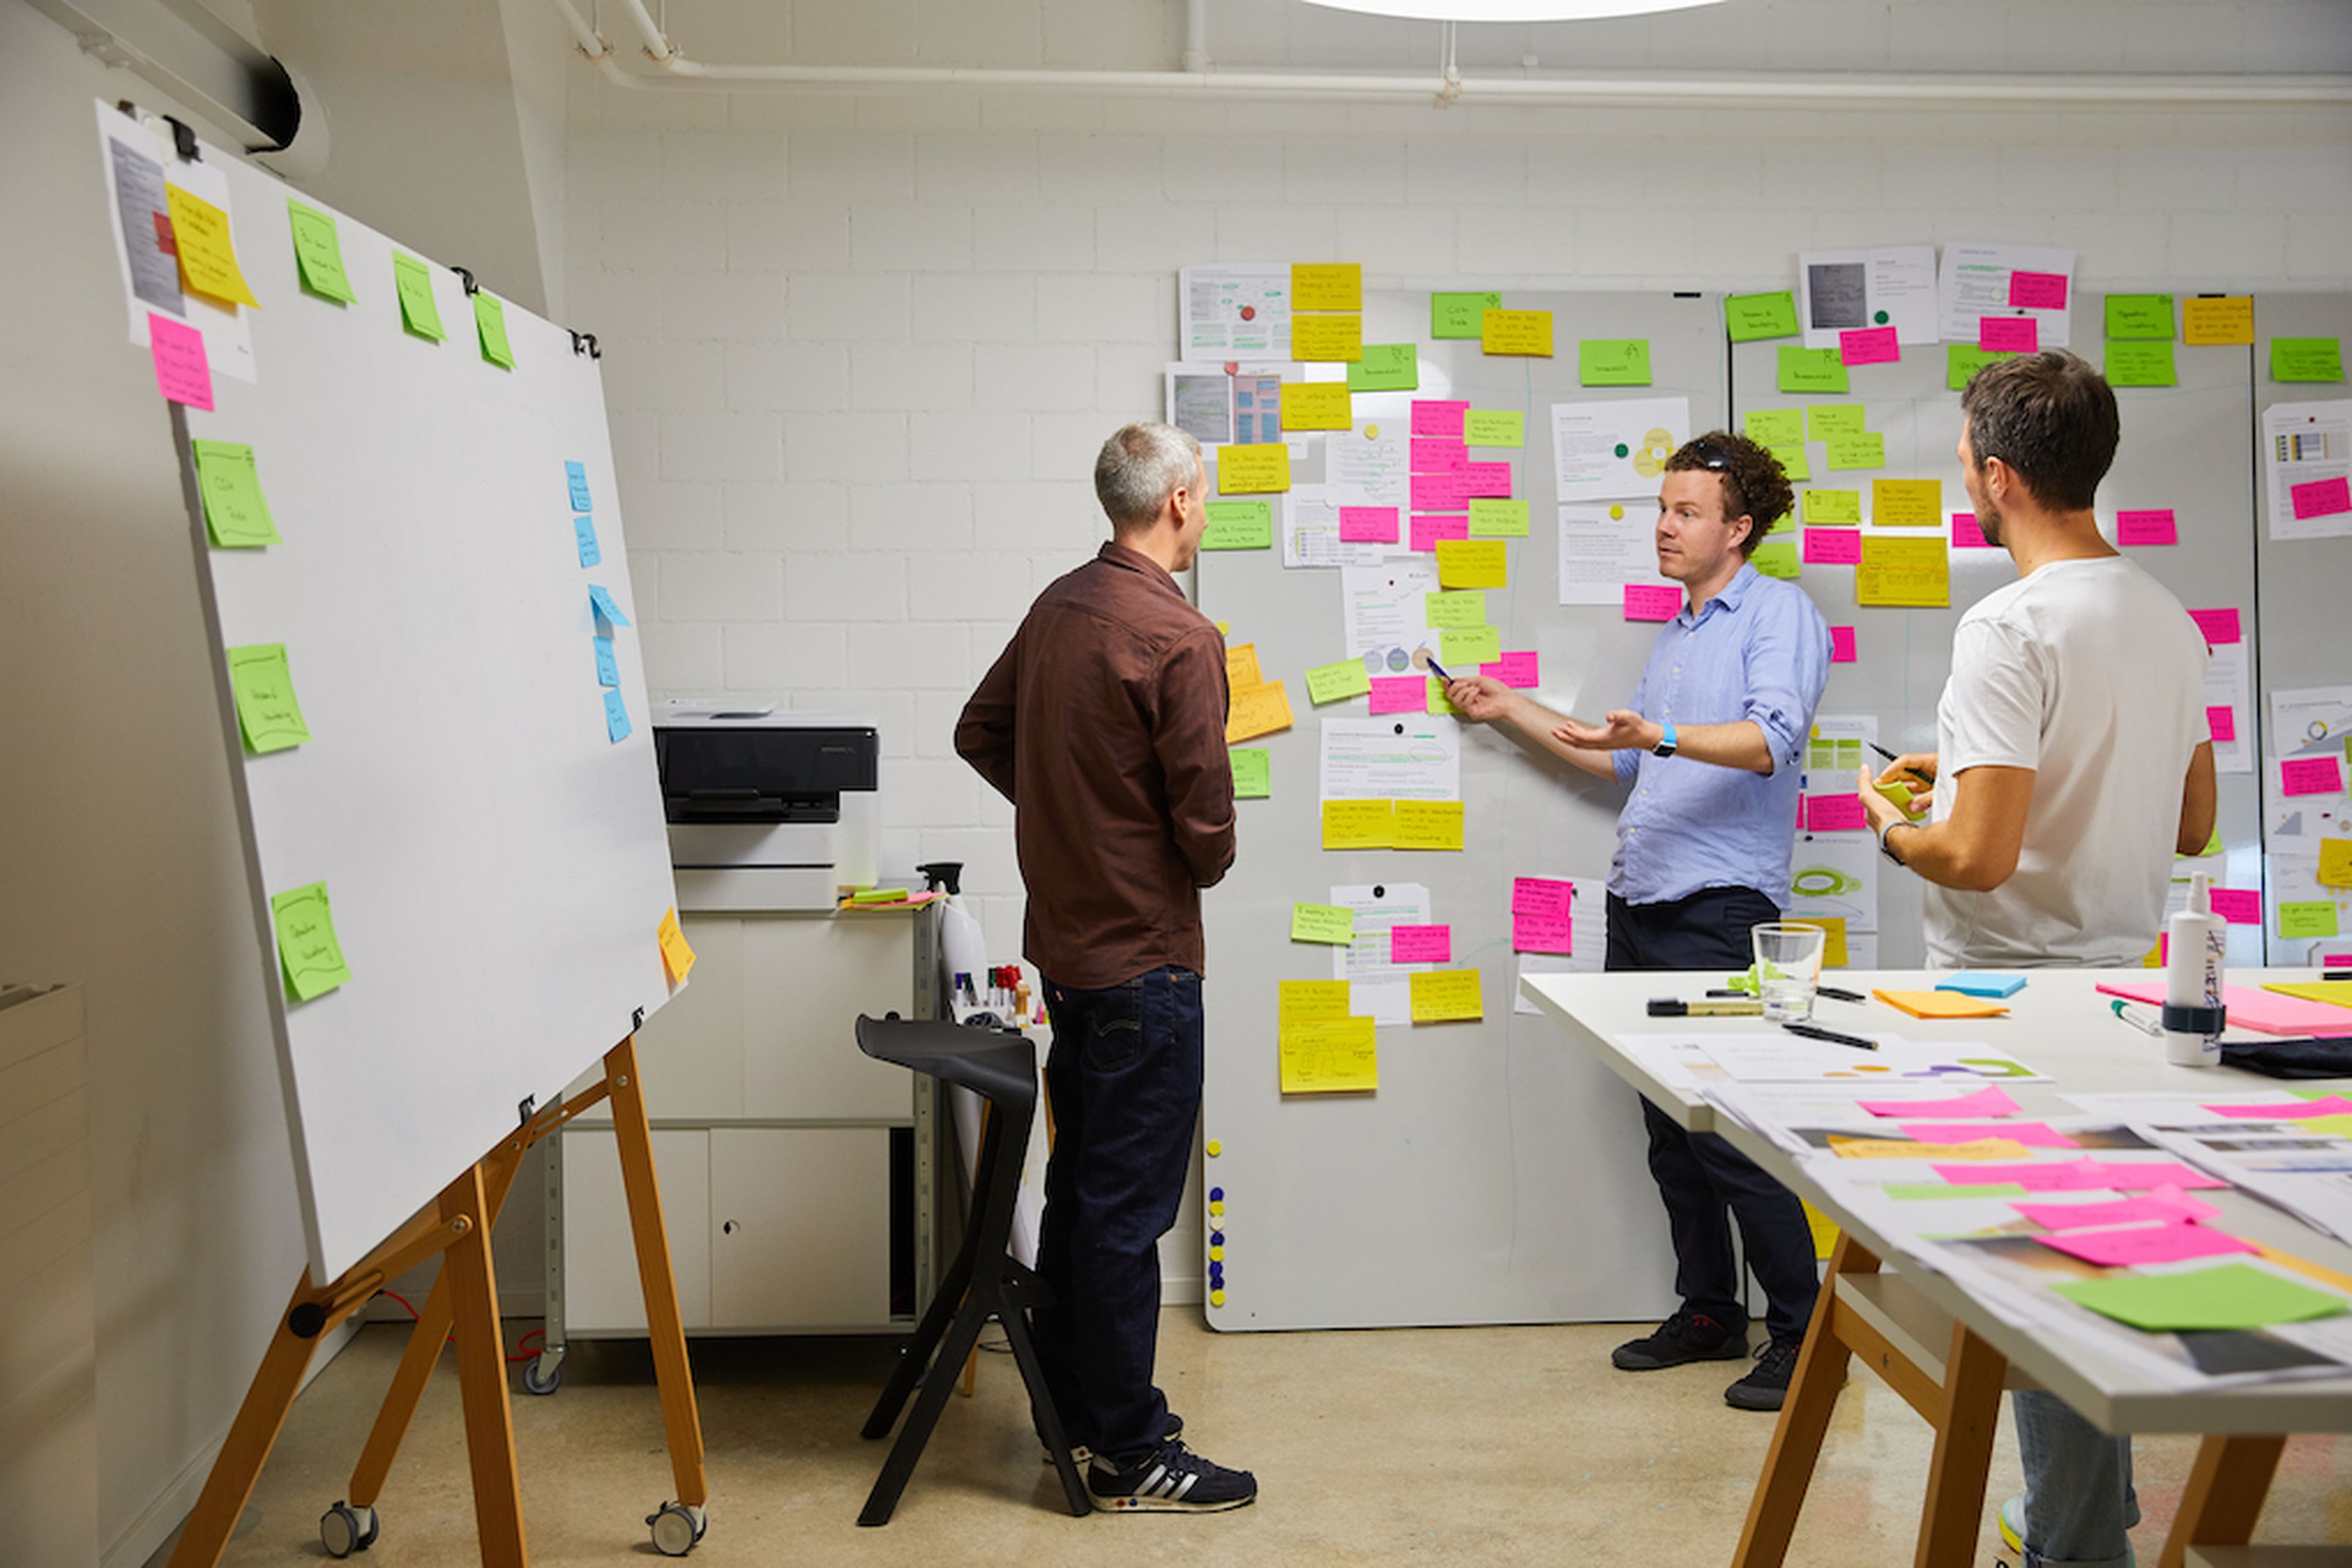 Three people have an inspiring discussion in a room surrounded by post-it notes